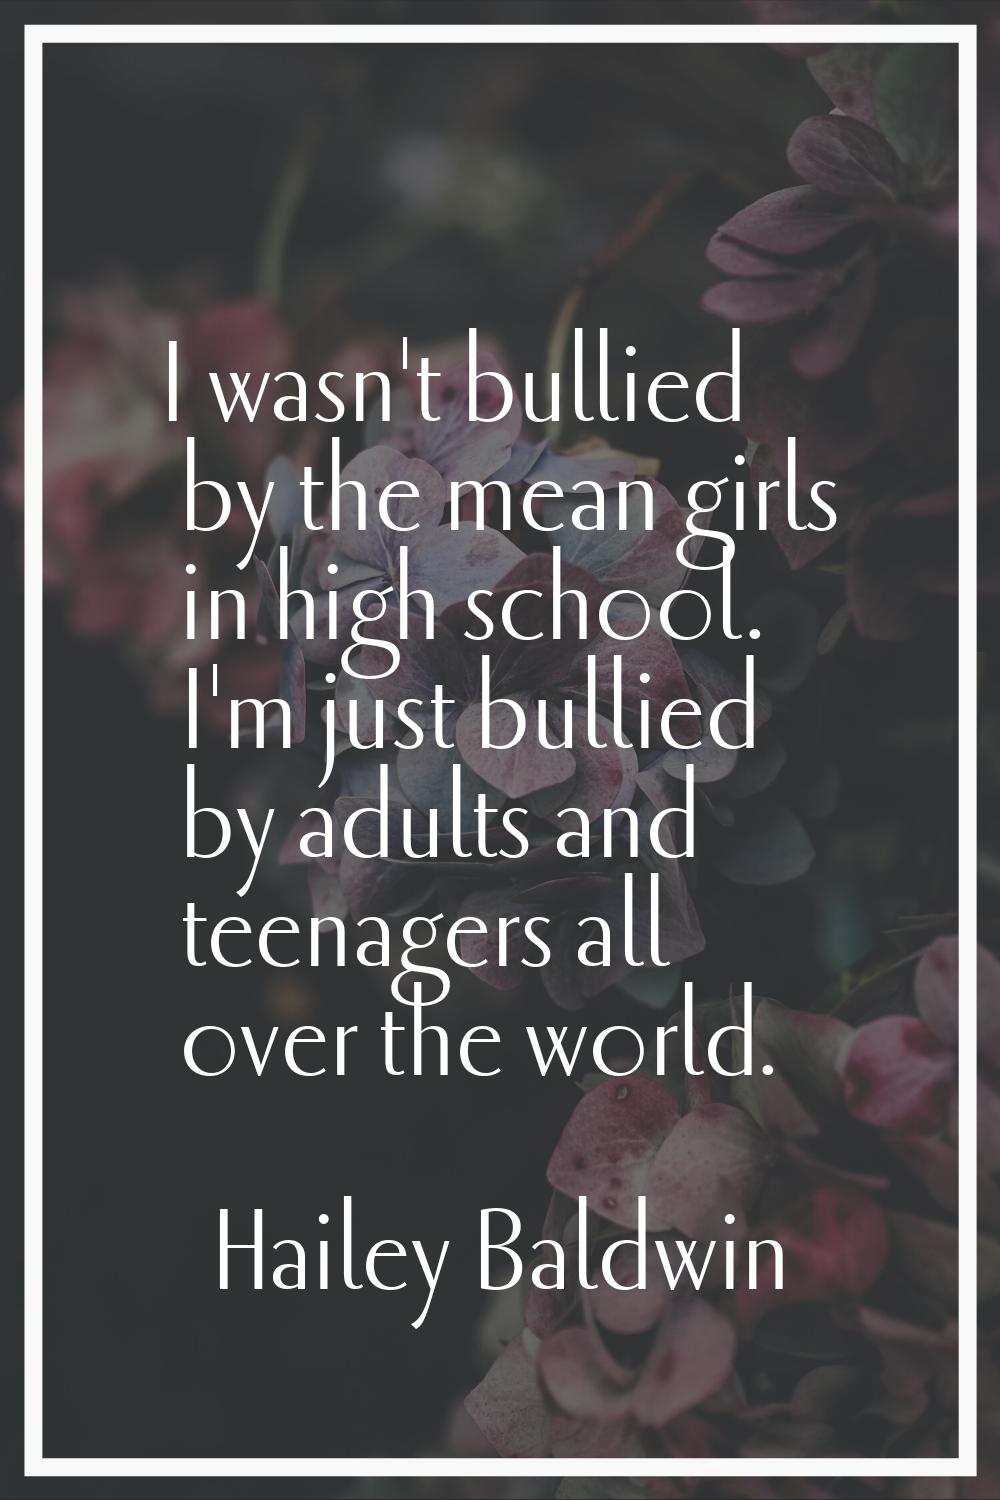 I wasn't bullied by the mean girls in high school. I'm just bullied by adults and teenagers all ove